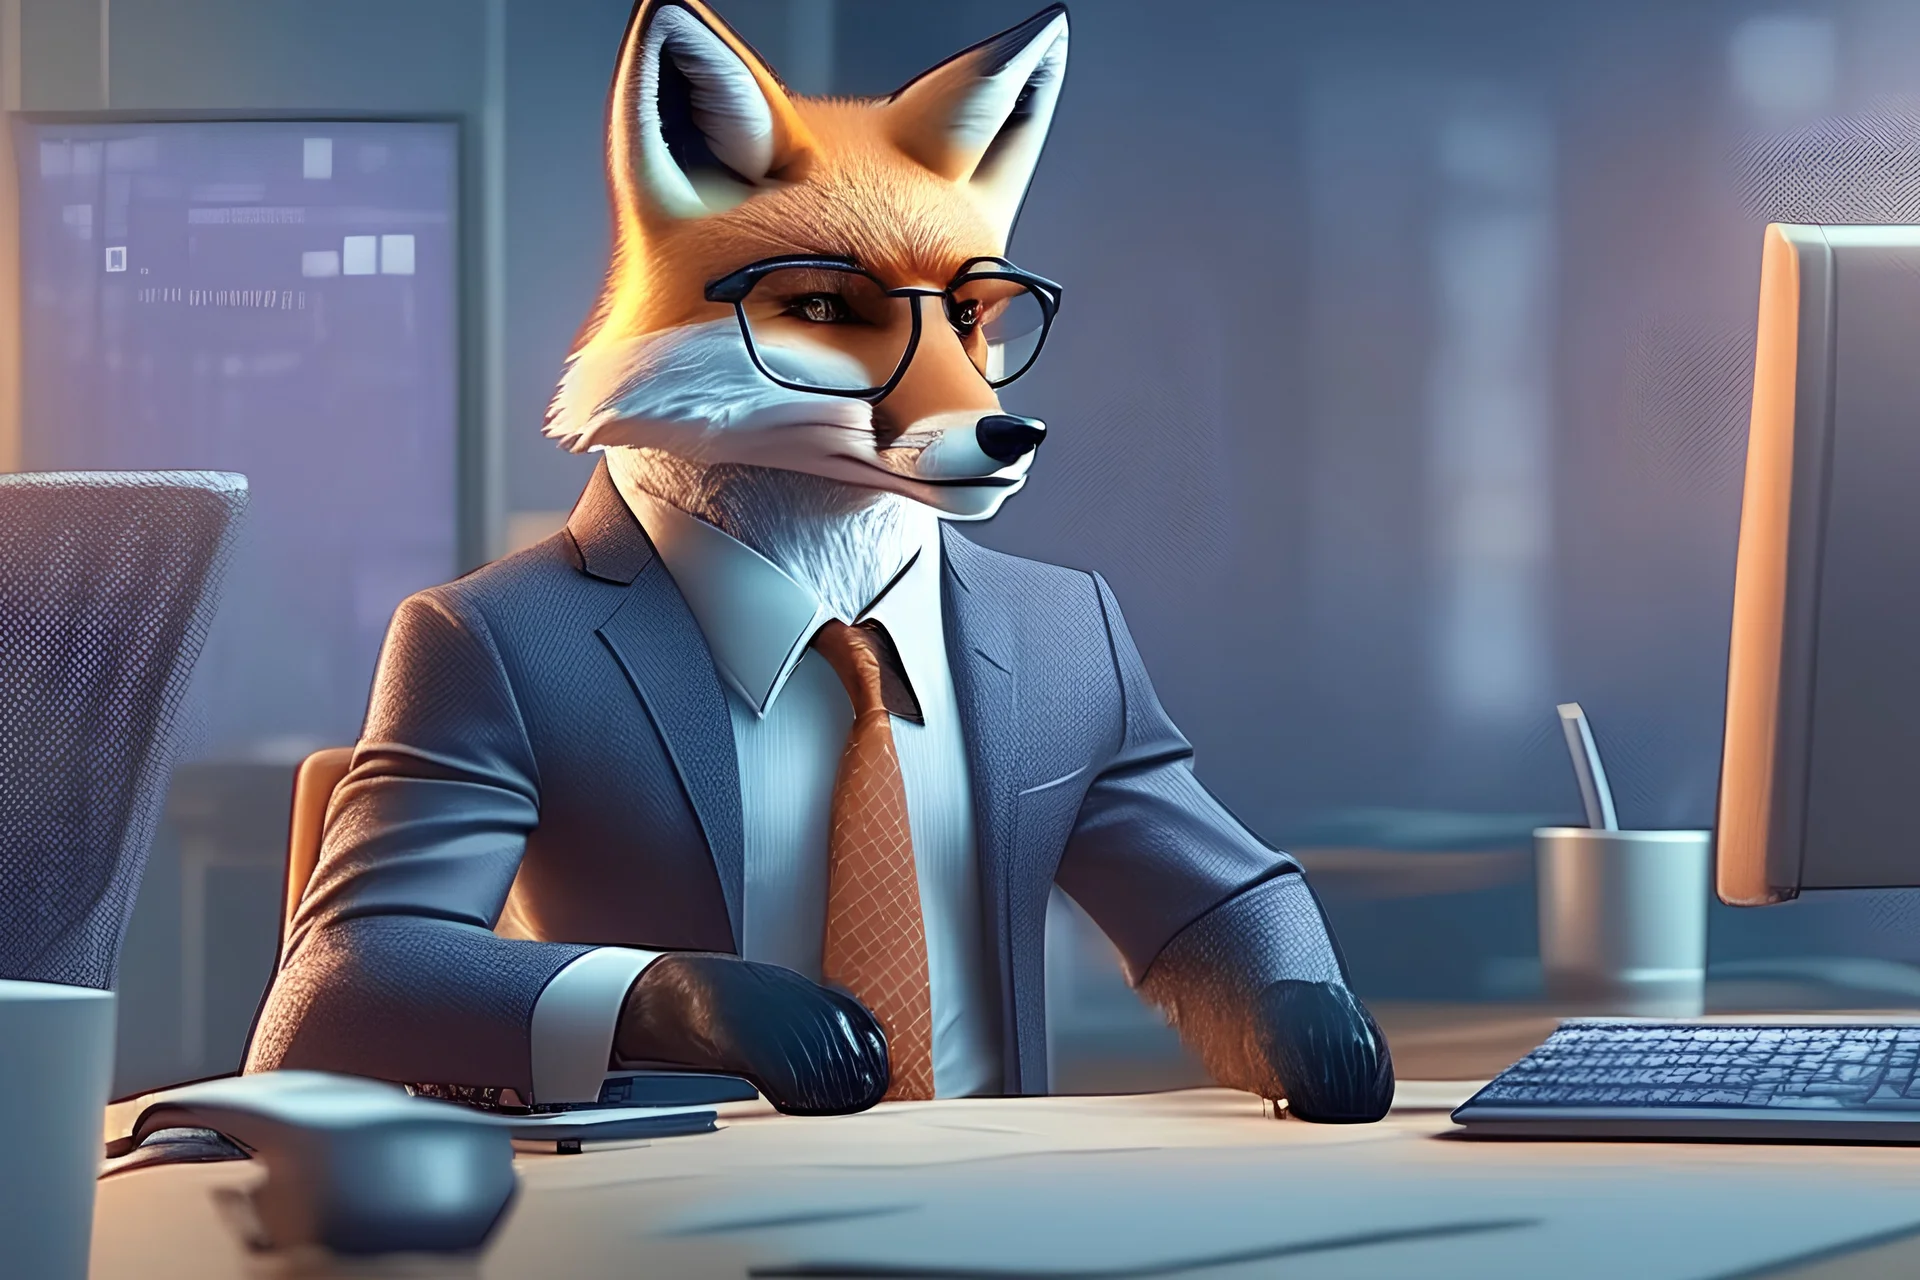 A fox as a business man, wearing a suit, full body of a human, working in an office, looking at a computer, wearing glasses, detailed background, 4K